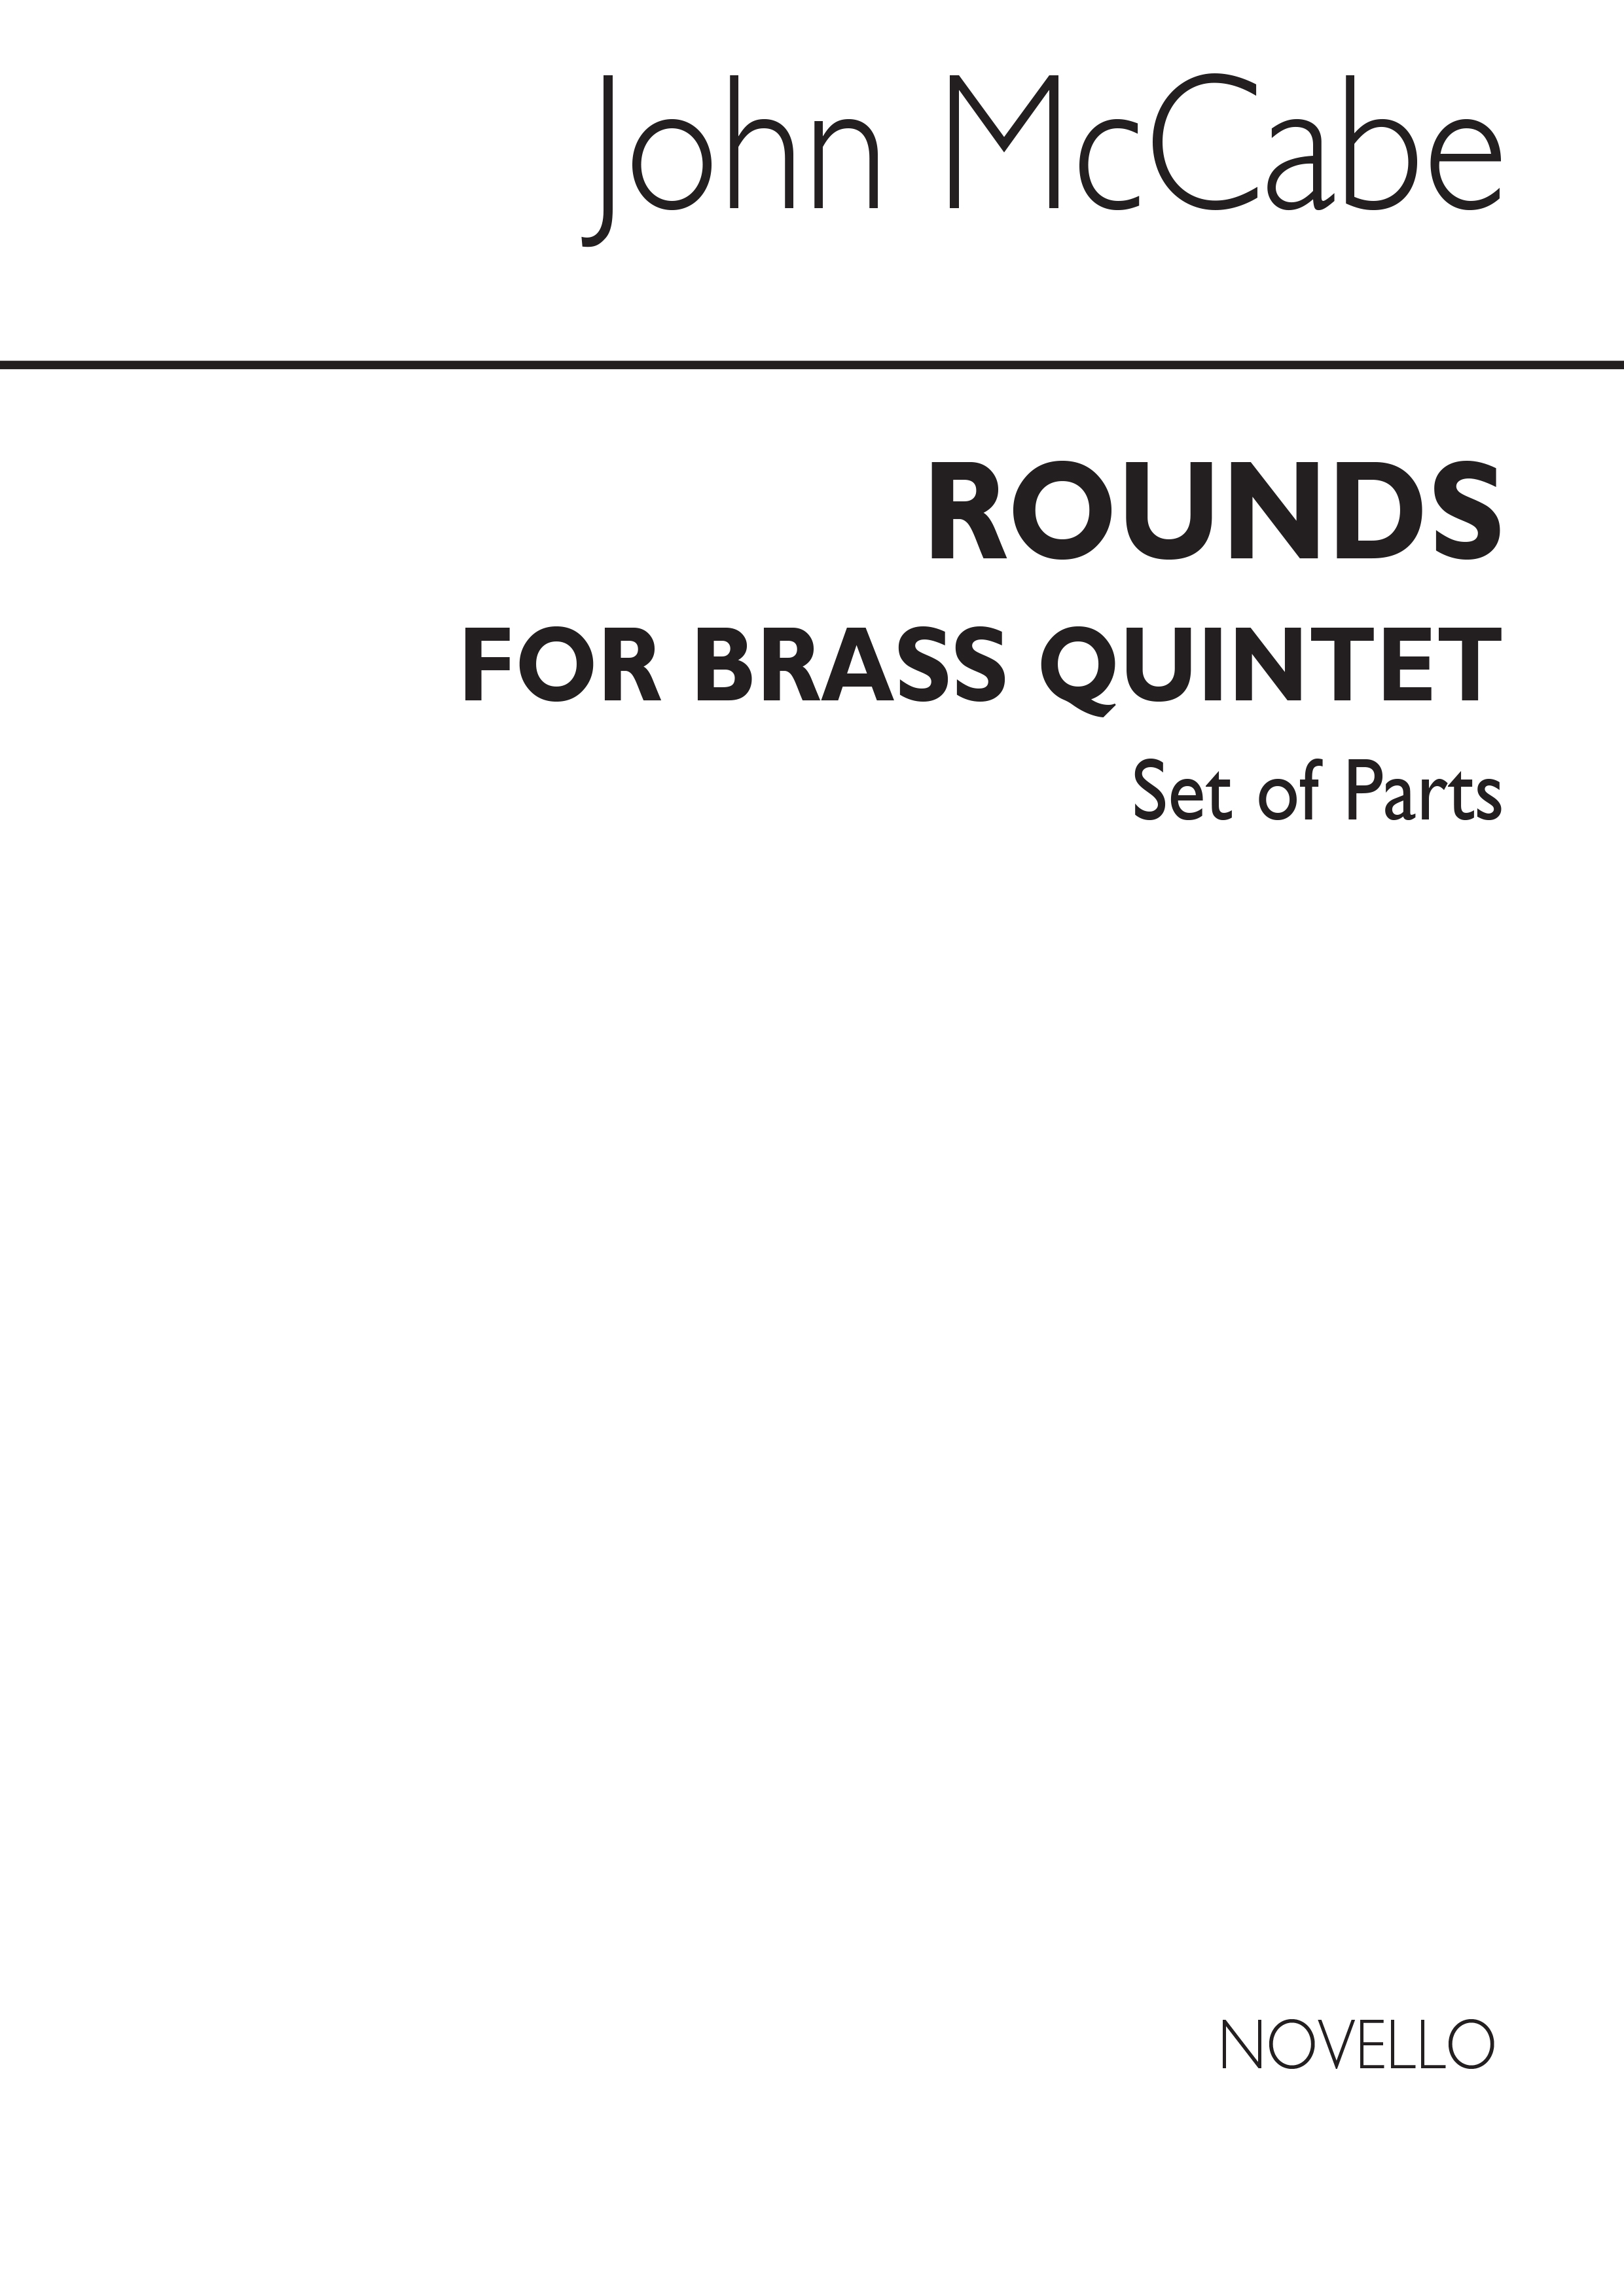 McCabe: Rounds For Brass Quintet (Parts)